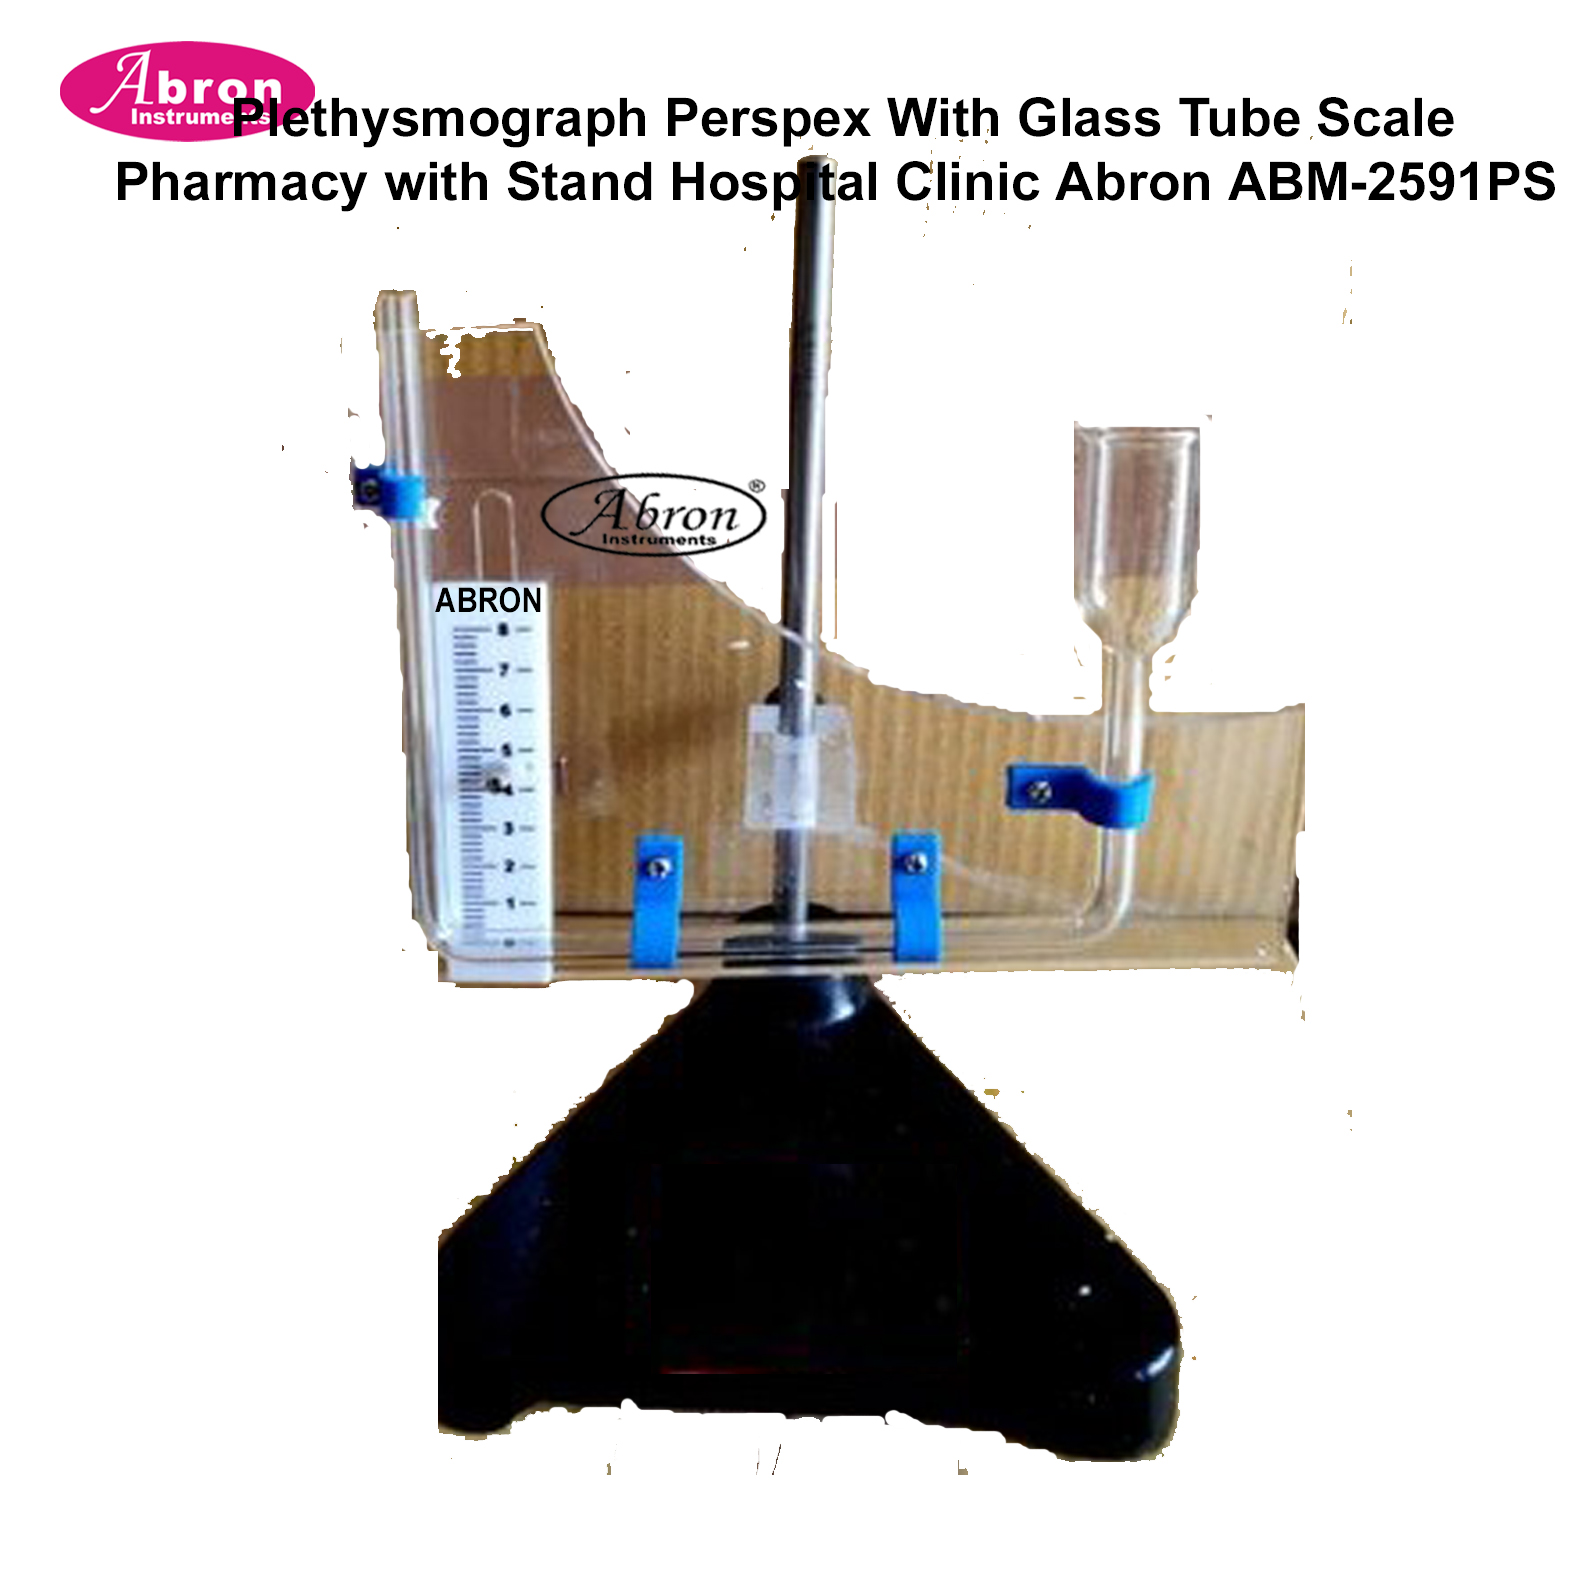 Plethysmograph Perspex With Glass Tube Scale Pharmacy With Stand Hospital Clinic Abron ABM-2591PS 